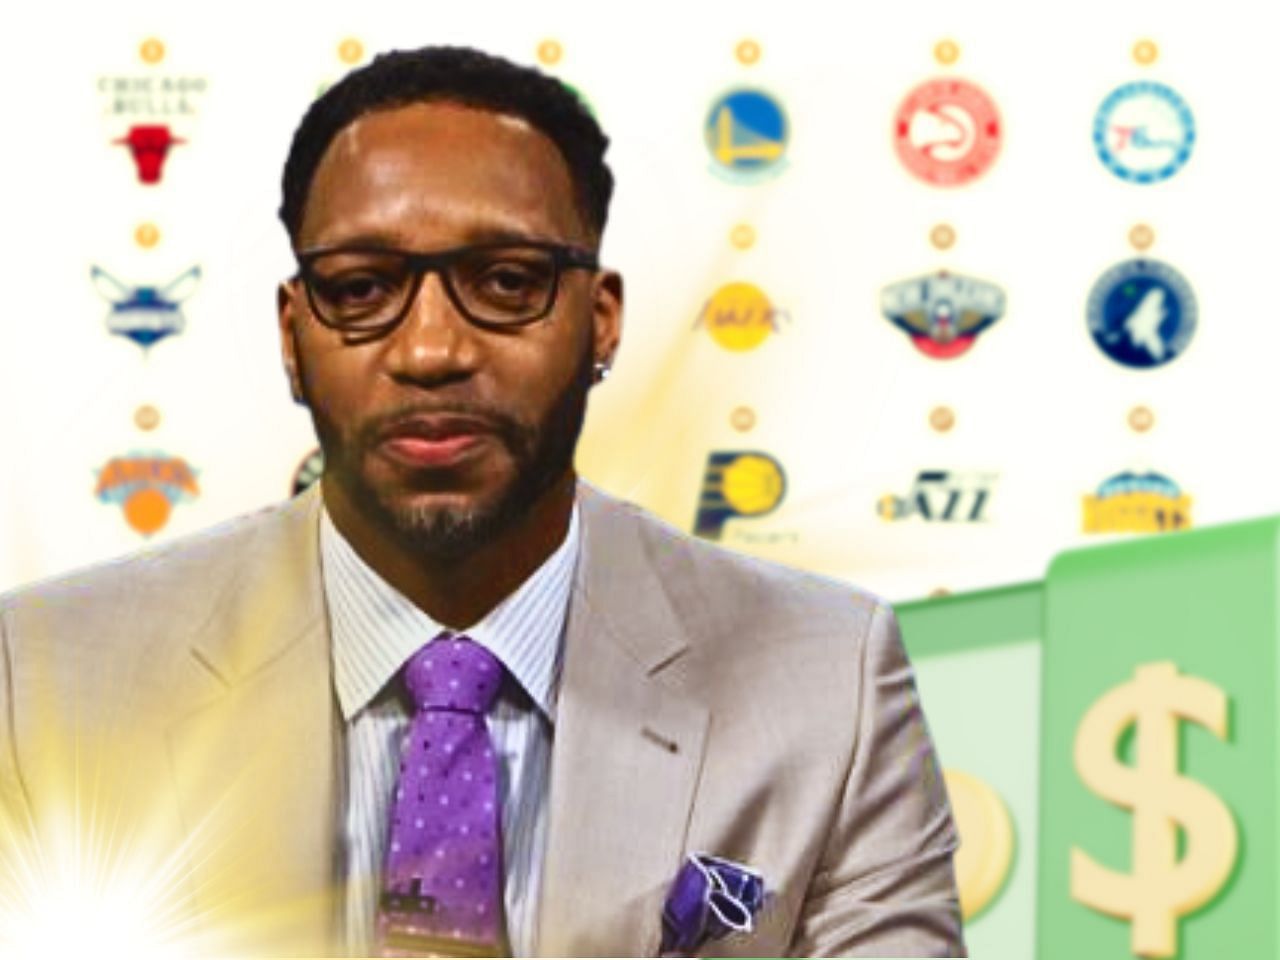 Tracy McGrady talks about team holders in the NBA